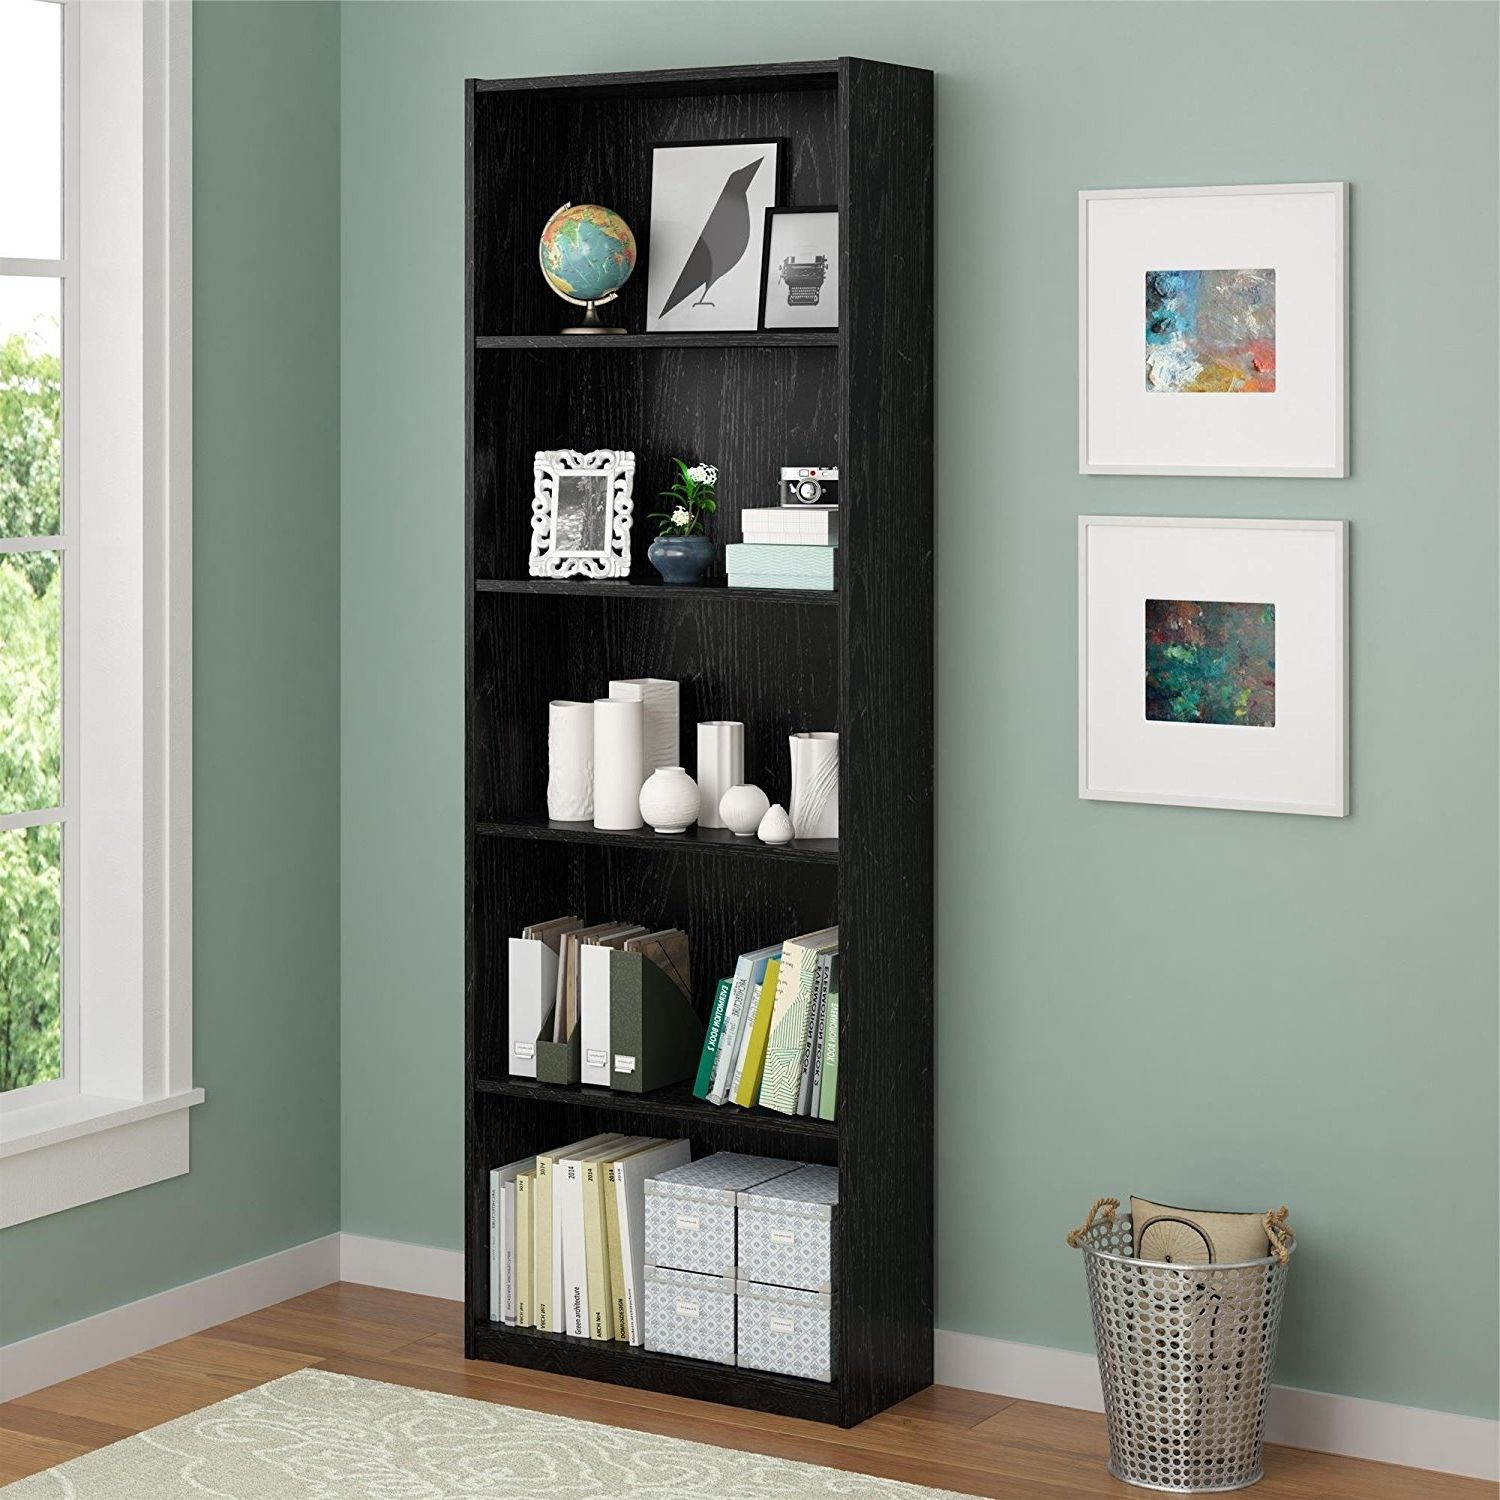 Ameriwood 5 Shelf Bookcases For Fashionable Amazon: Ameriwood 5 Shelf Adjustable Bookcase, Set Of 2, Black (View 3 of 15)